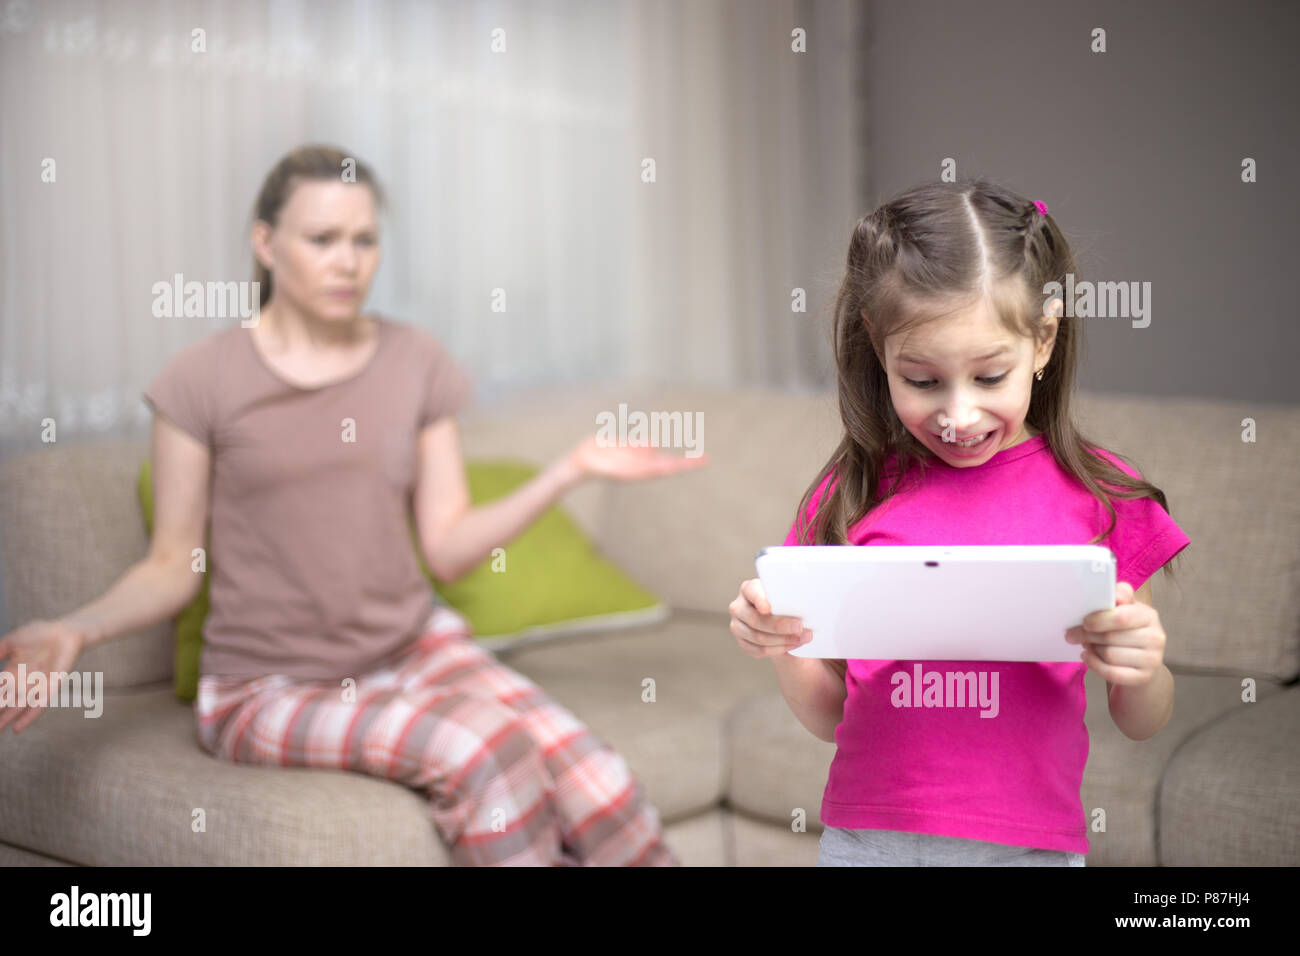 Mother frustrating that her daughter playing video games. Happy child girl and sad mother. Stock Photo